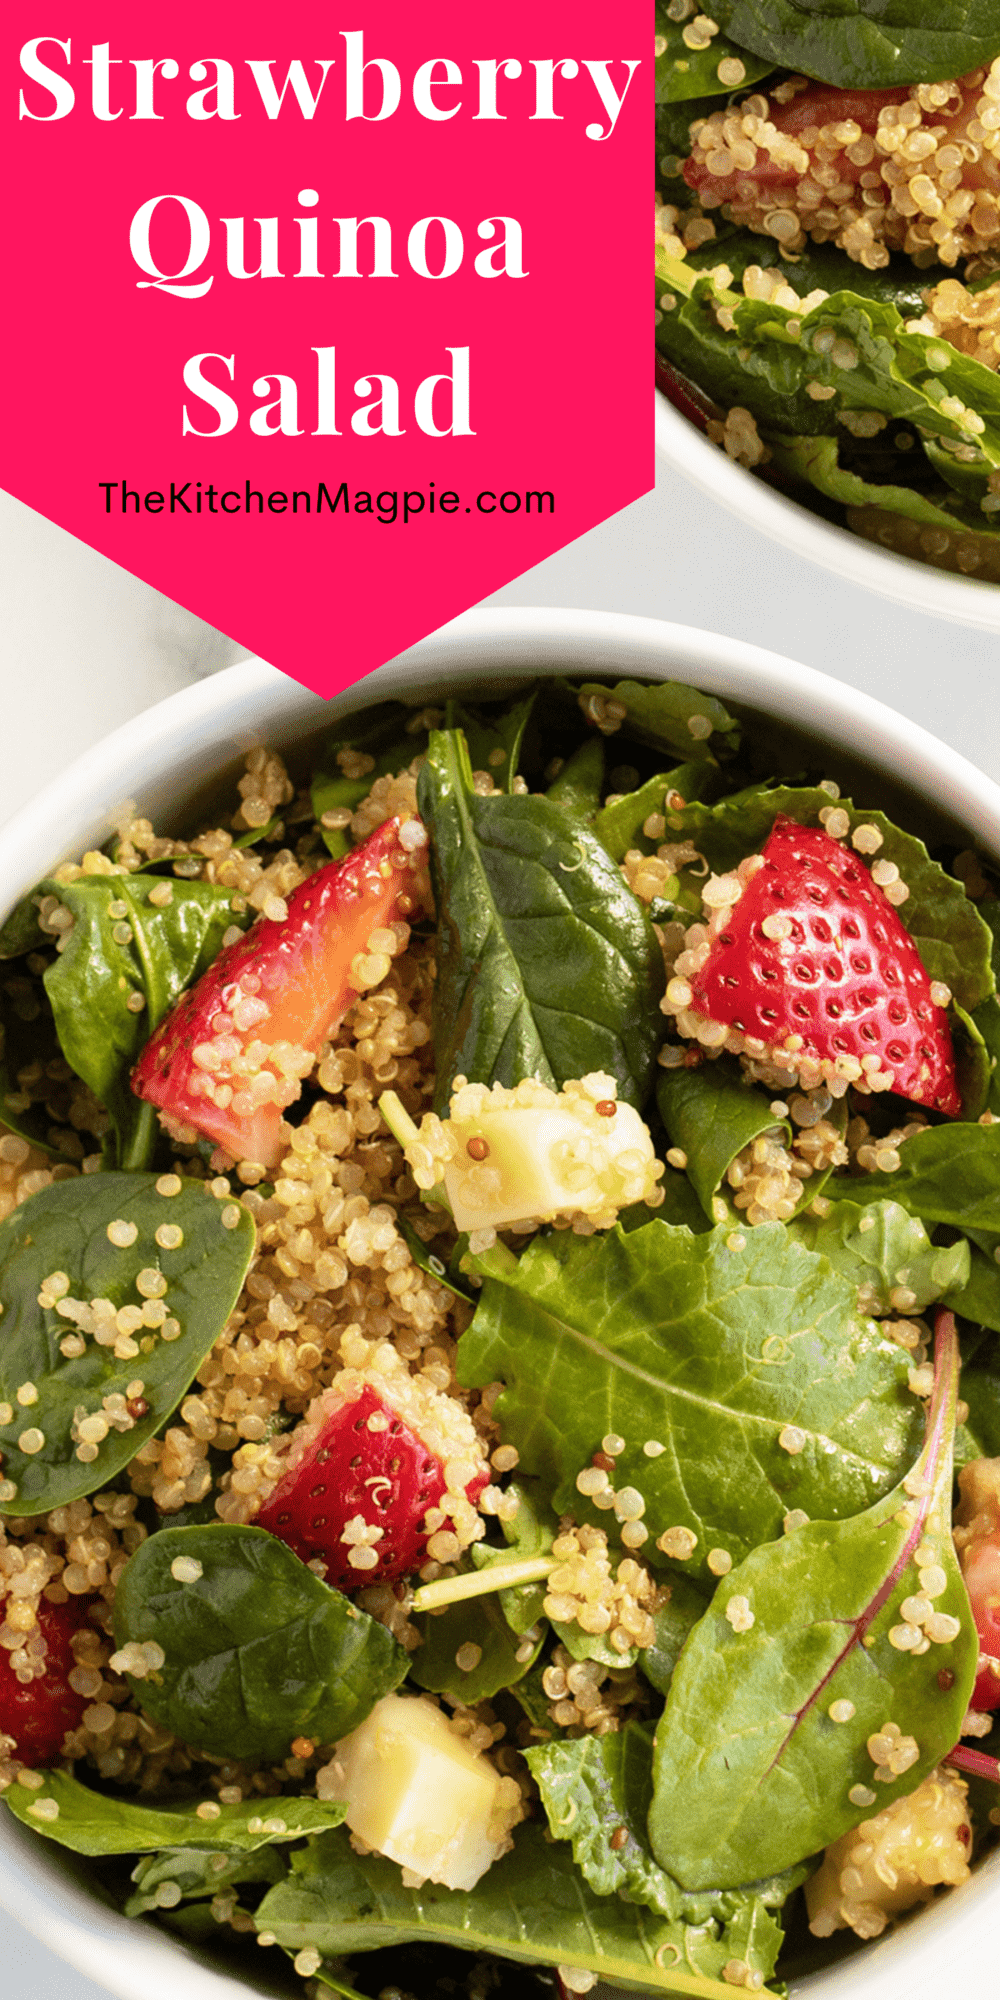 Decadent strawberry salad with brie cheese,quinoa kale, chard & spinach. Top with a sweet grainy mustard vinaigrette.